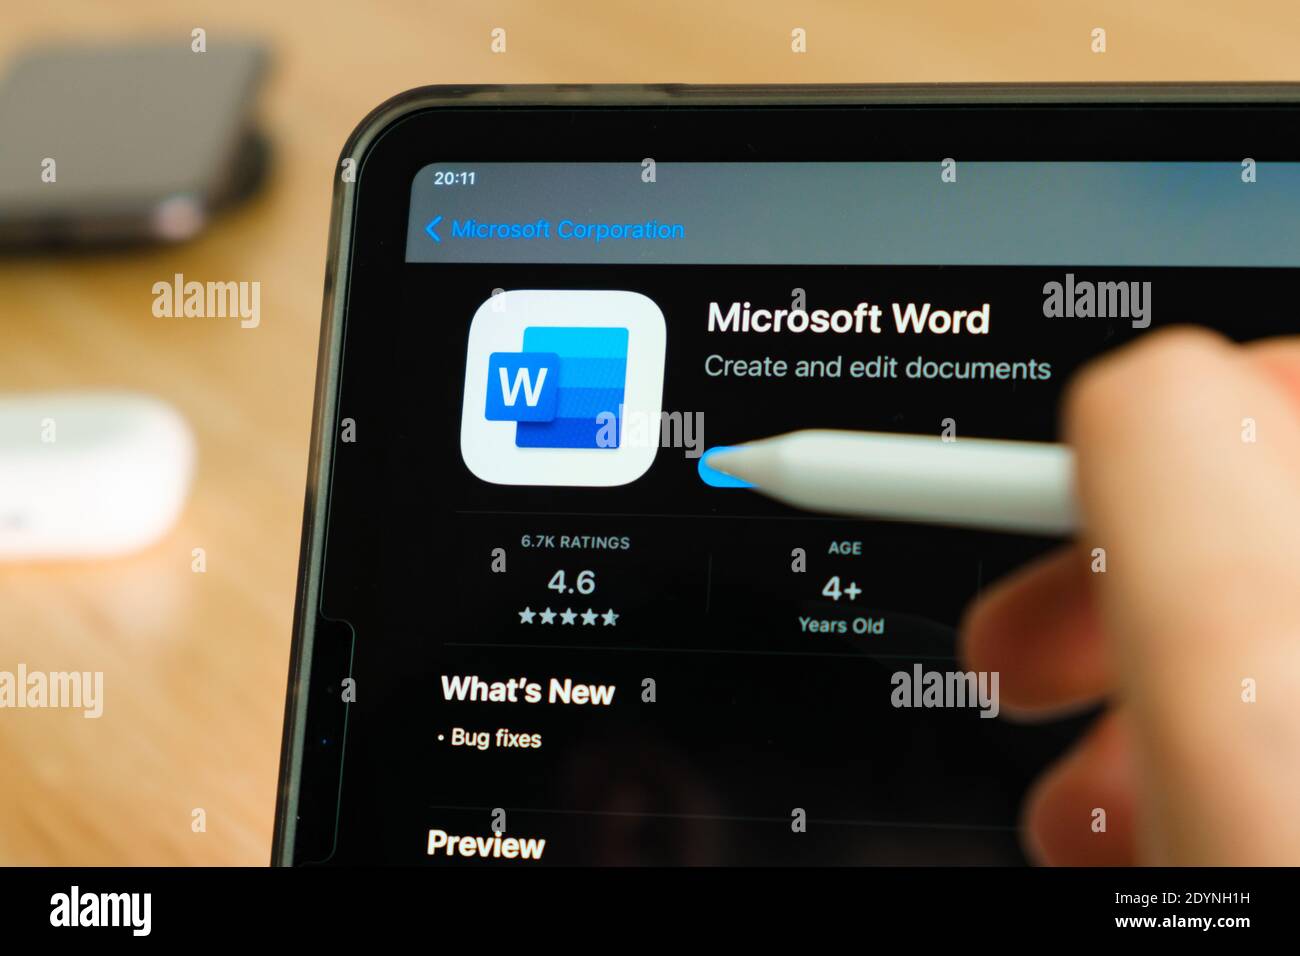 Microsoft Word logo shown by apple pencil on the iPad Pro tablet screen.  Man using application on the tablet. December 2020, San Francisco, USA  Stock Photo - Alamy